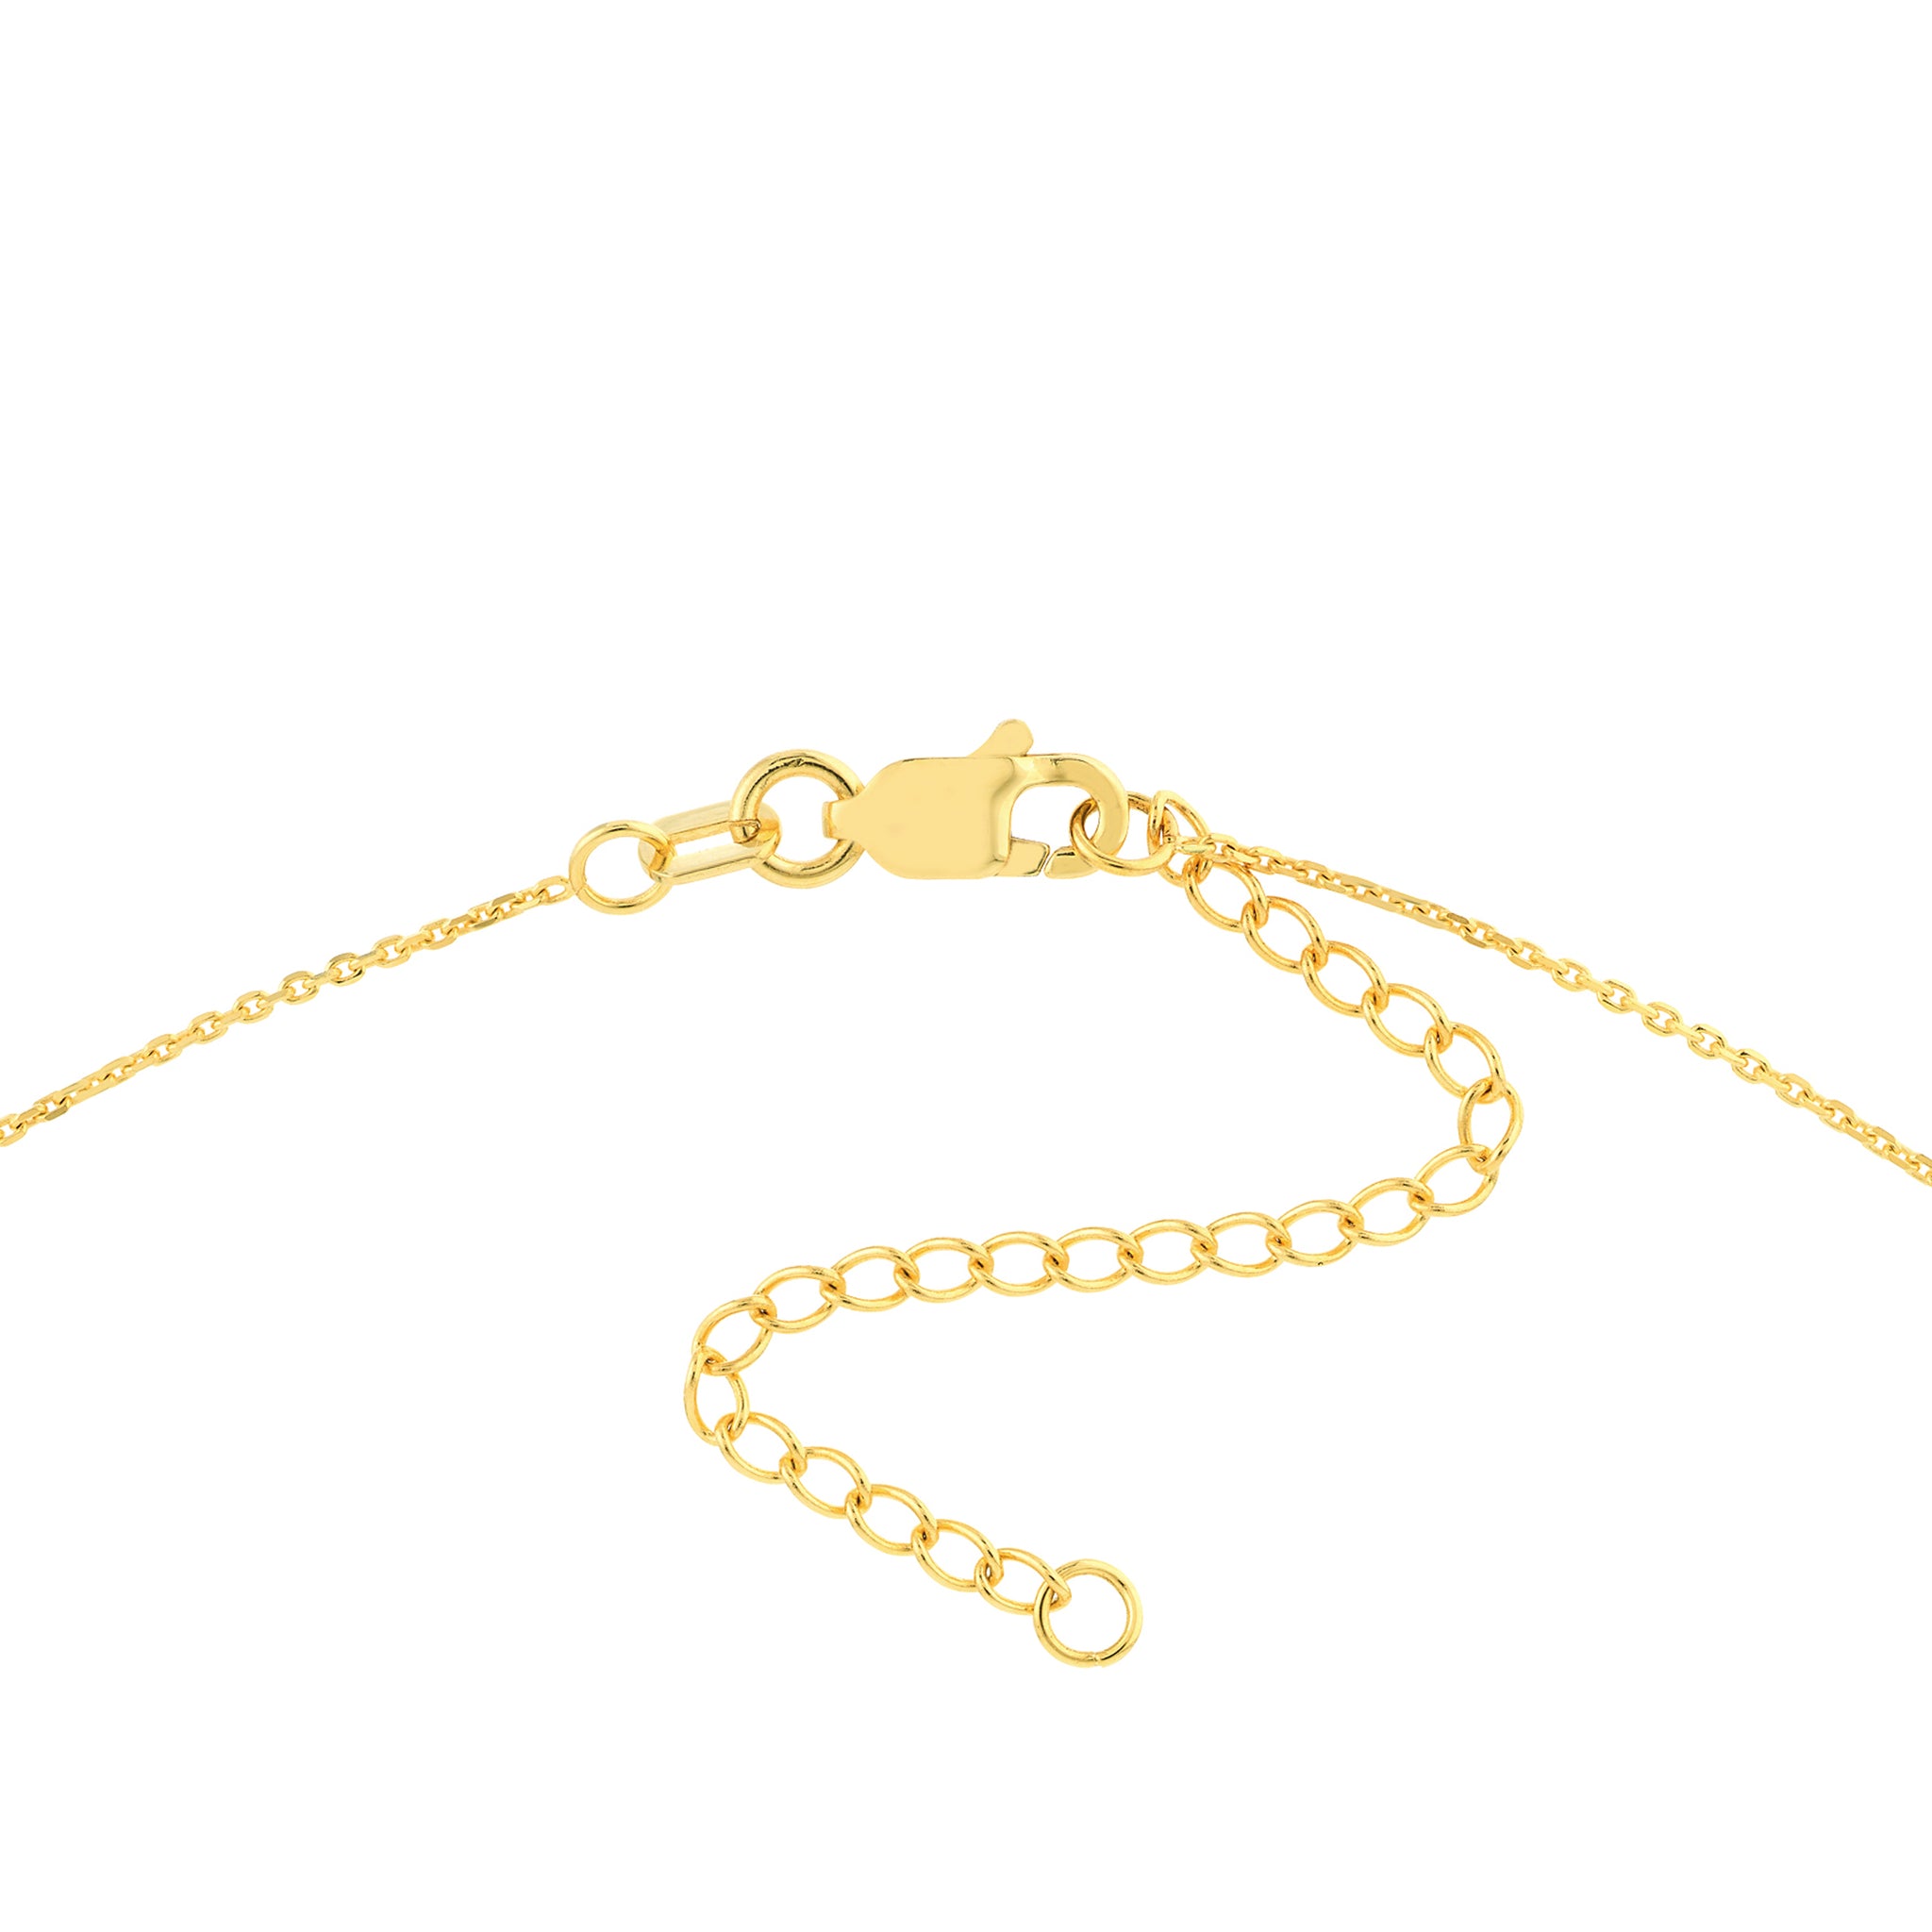 Hemsleys Collection 14K Yellow Gold Engravable Disc Necklace